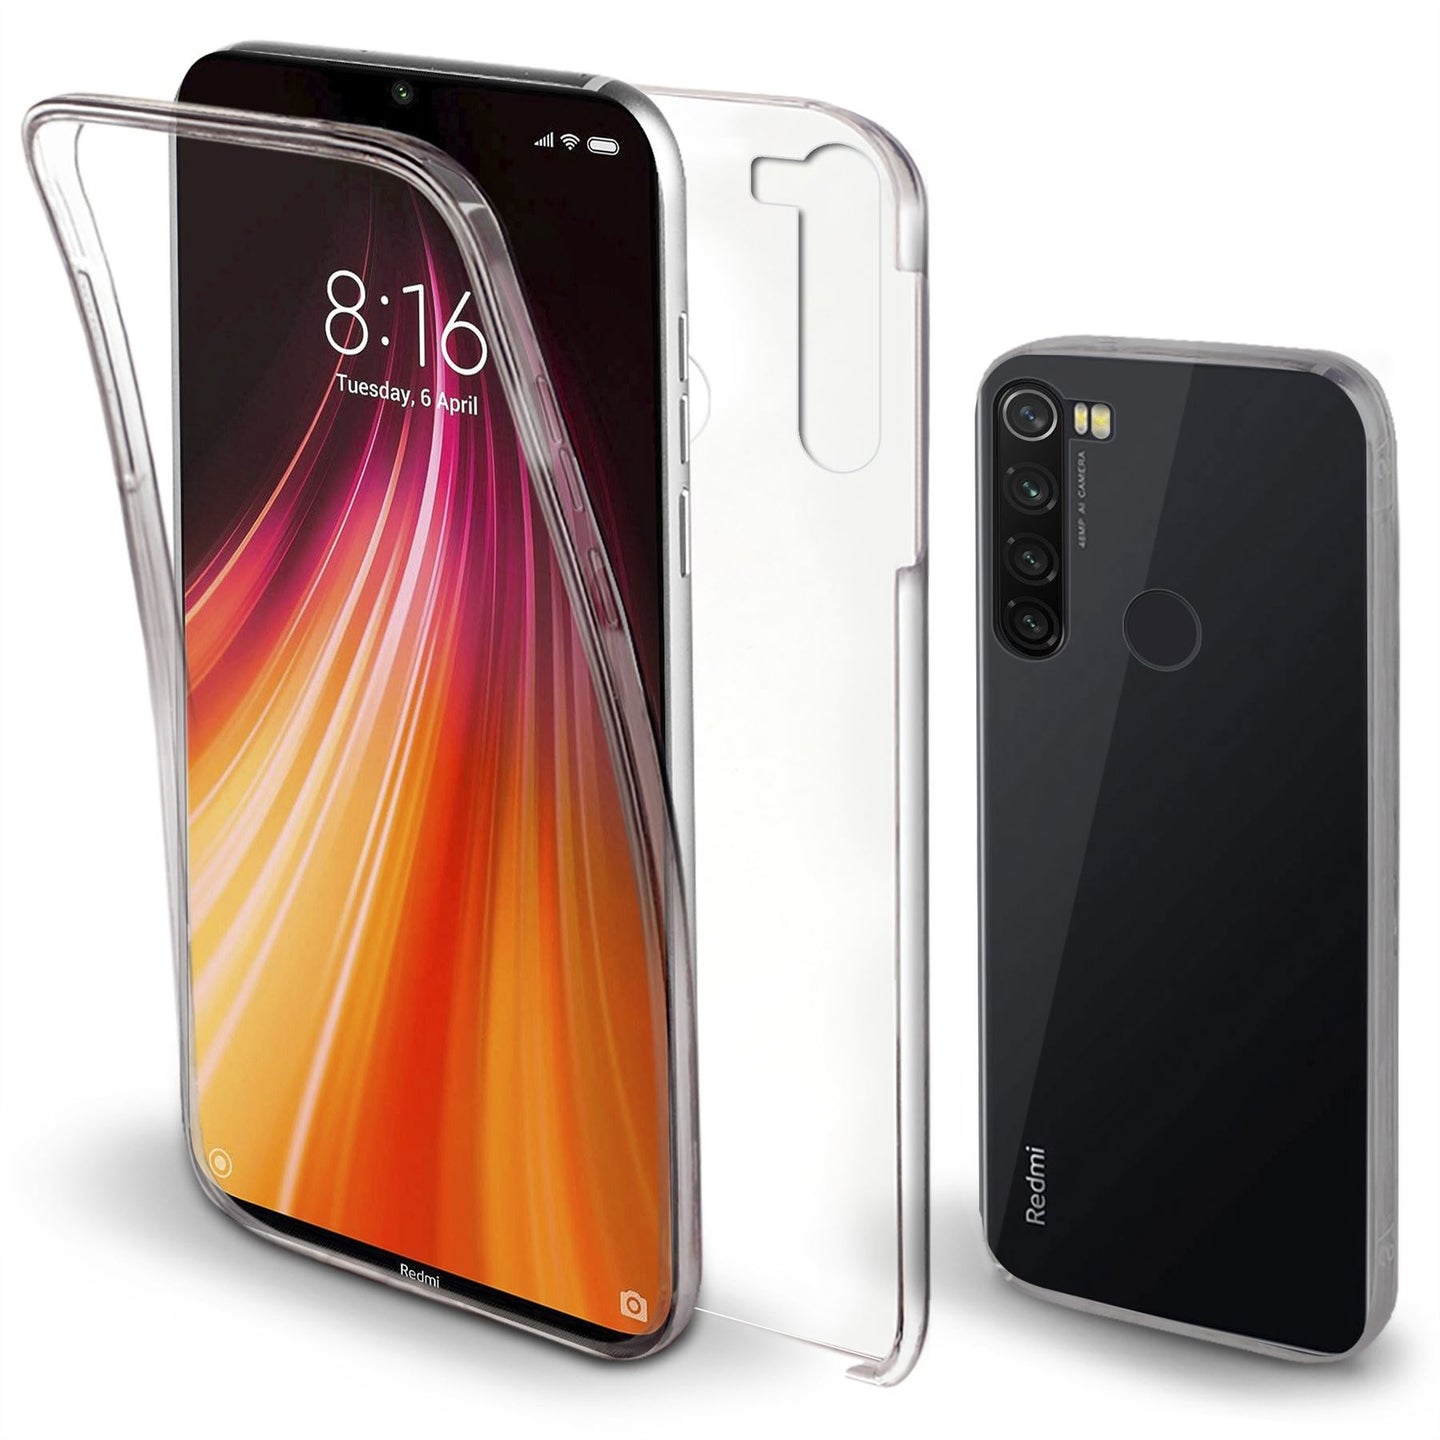 Moozy 360 Degree Case for Xiaomi Redmi Note 8 - Transparent Full body Slim Cover - Hard PC Back and Soft TPU Silicone Front